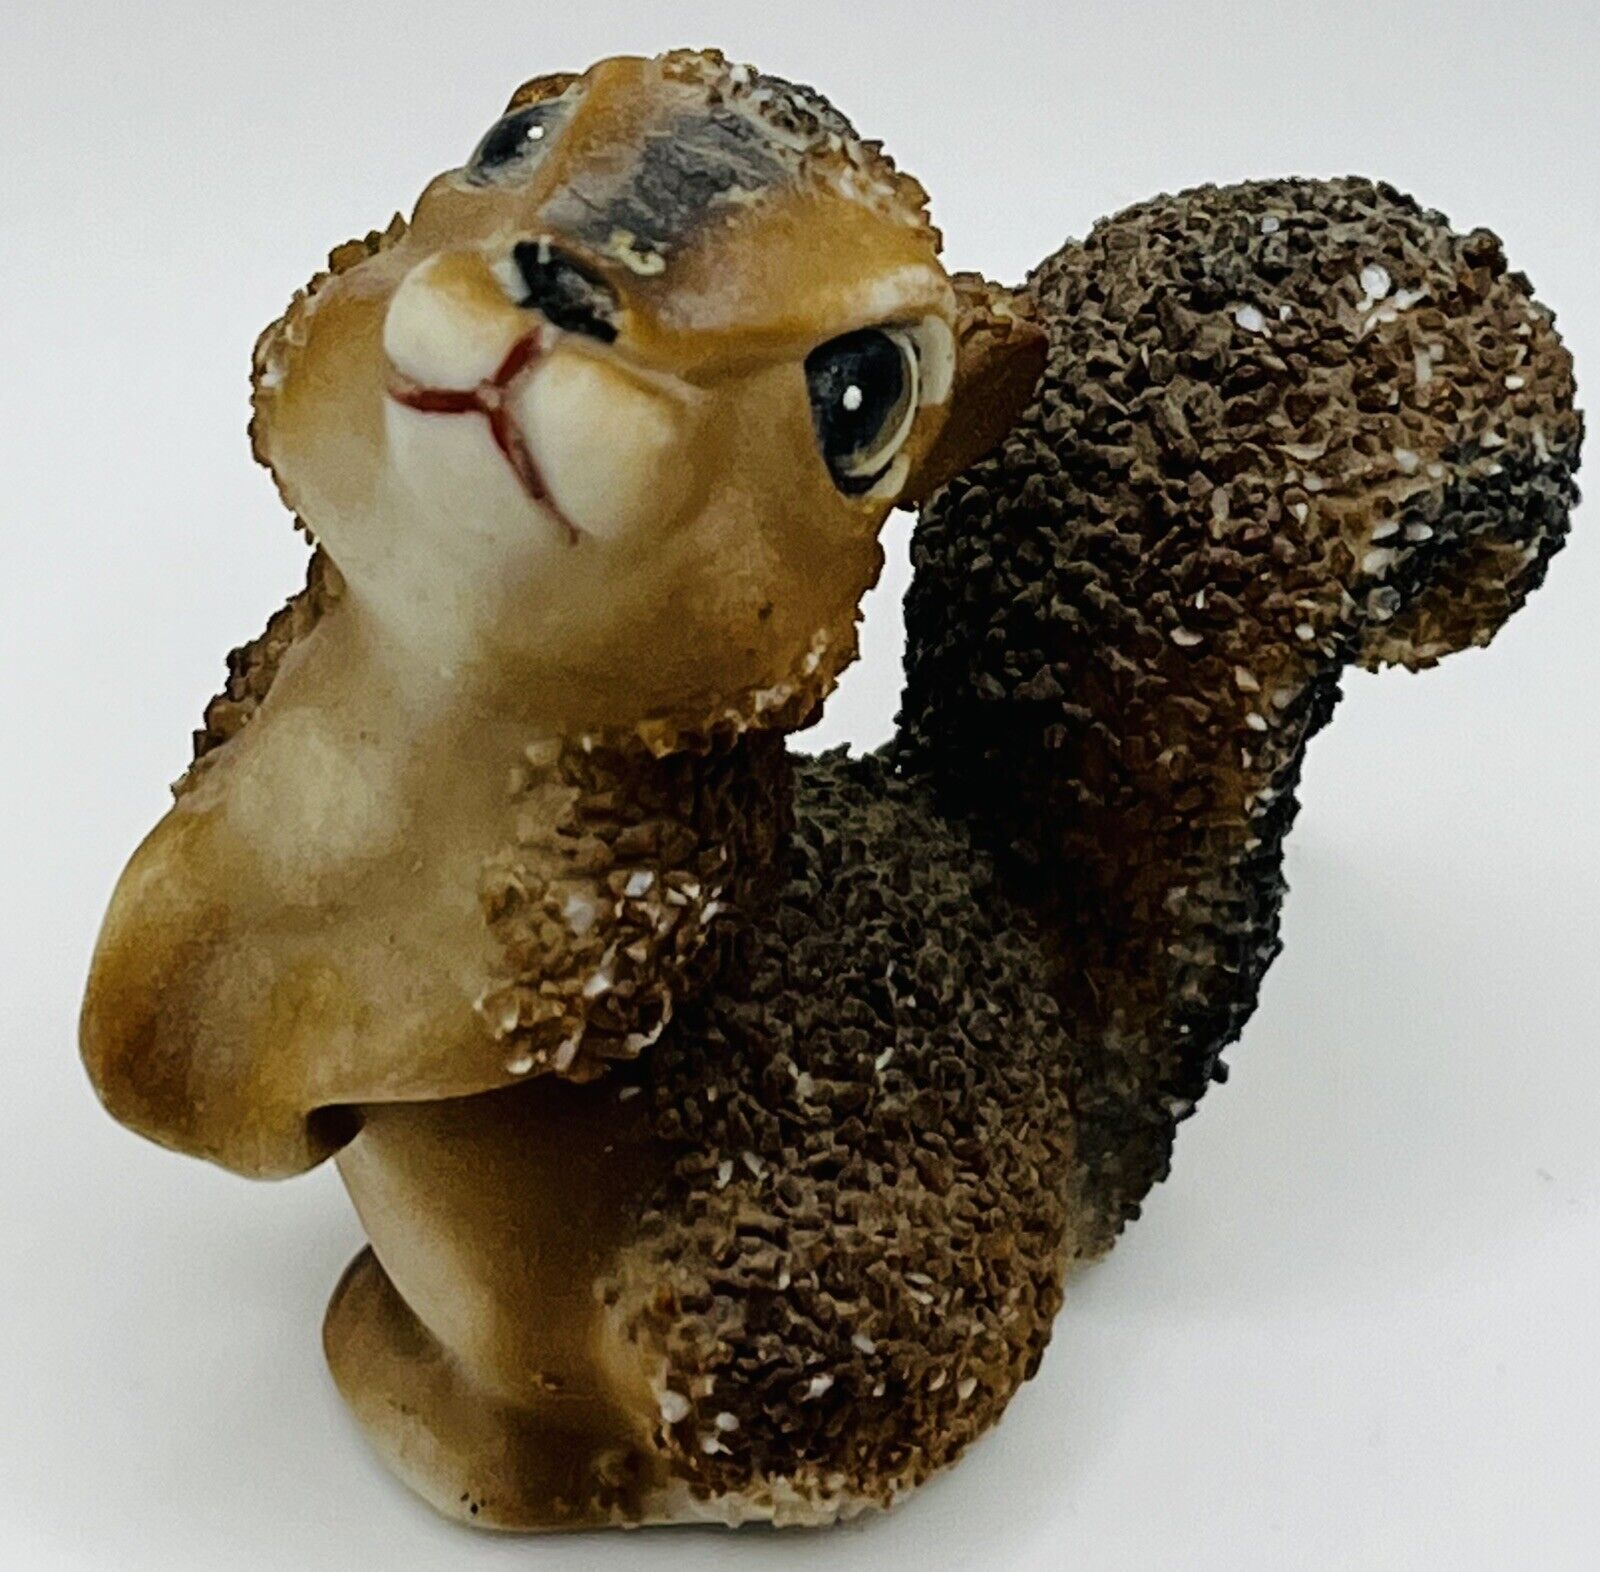 Vintage Squirrel Figurine With Sugar Texture Made in Japan 2.5 Inches Tall